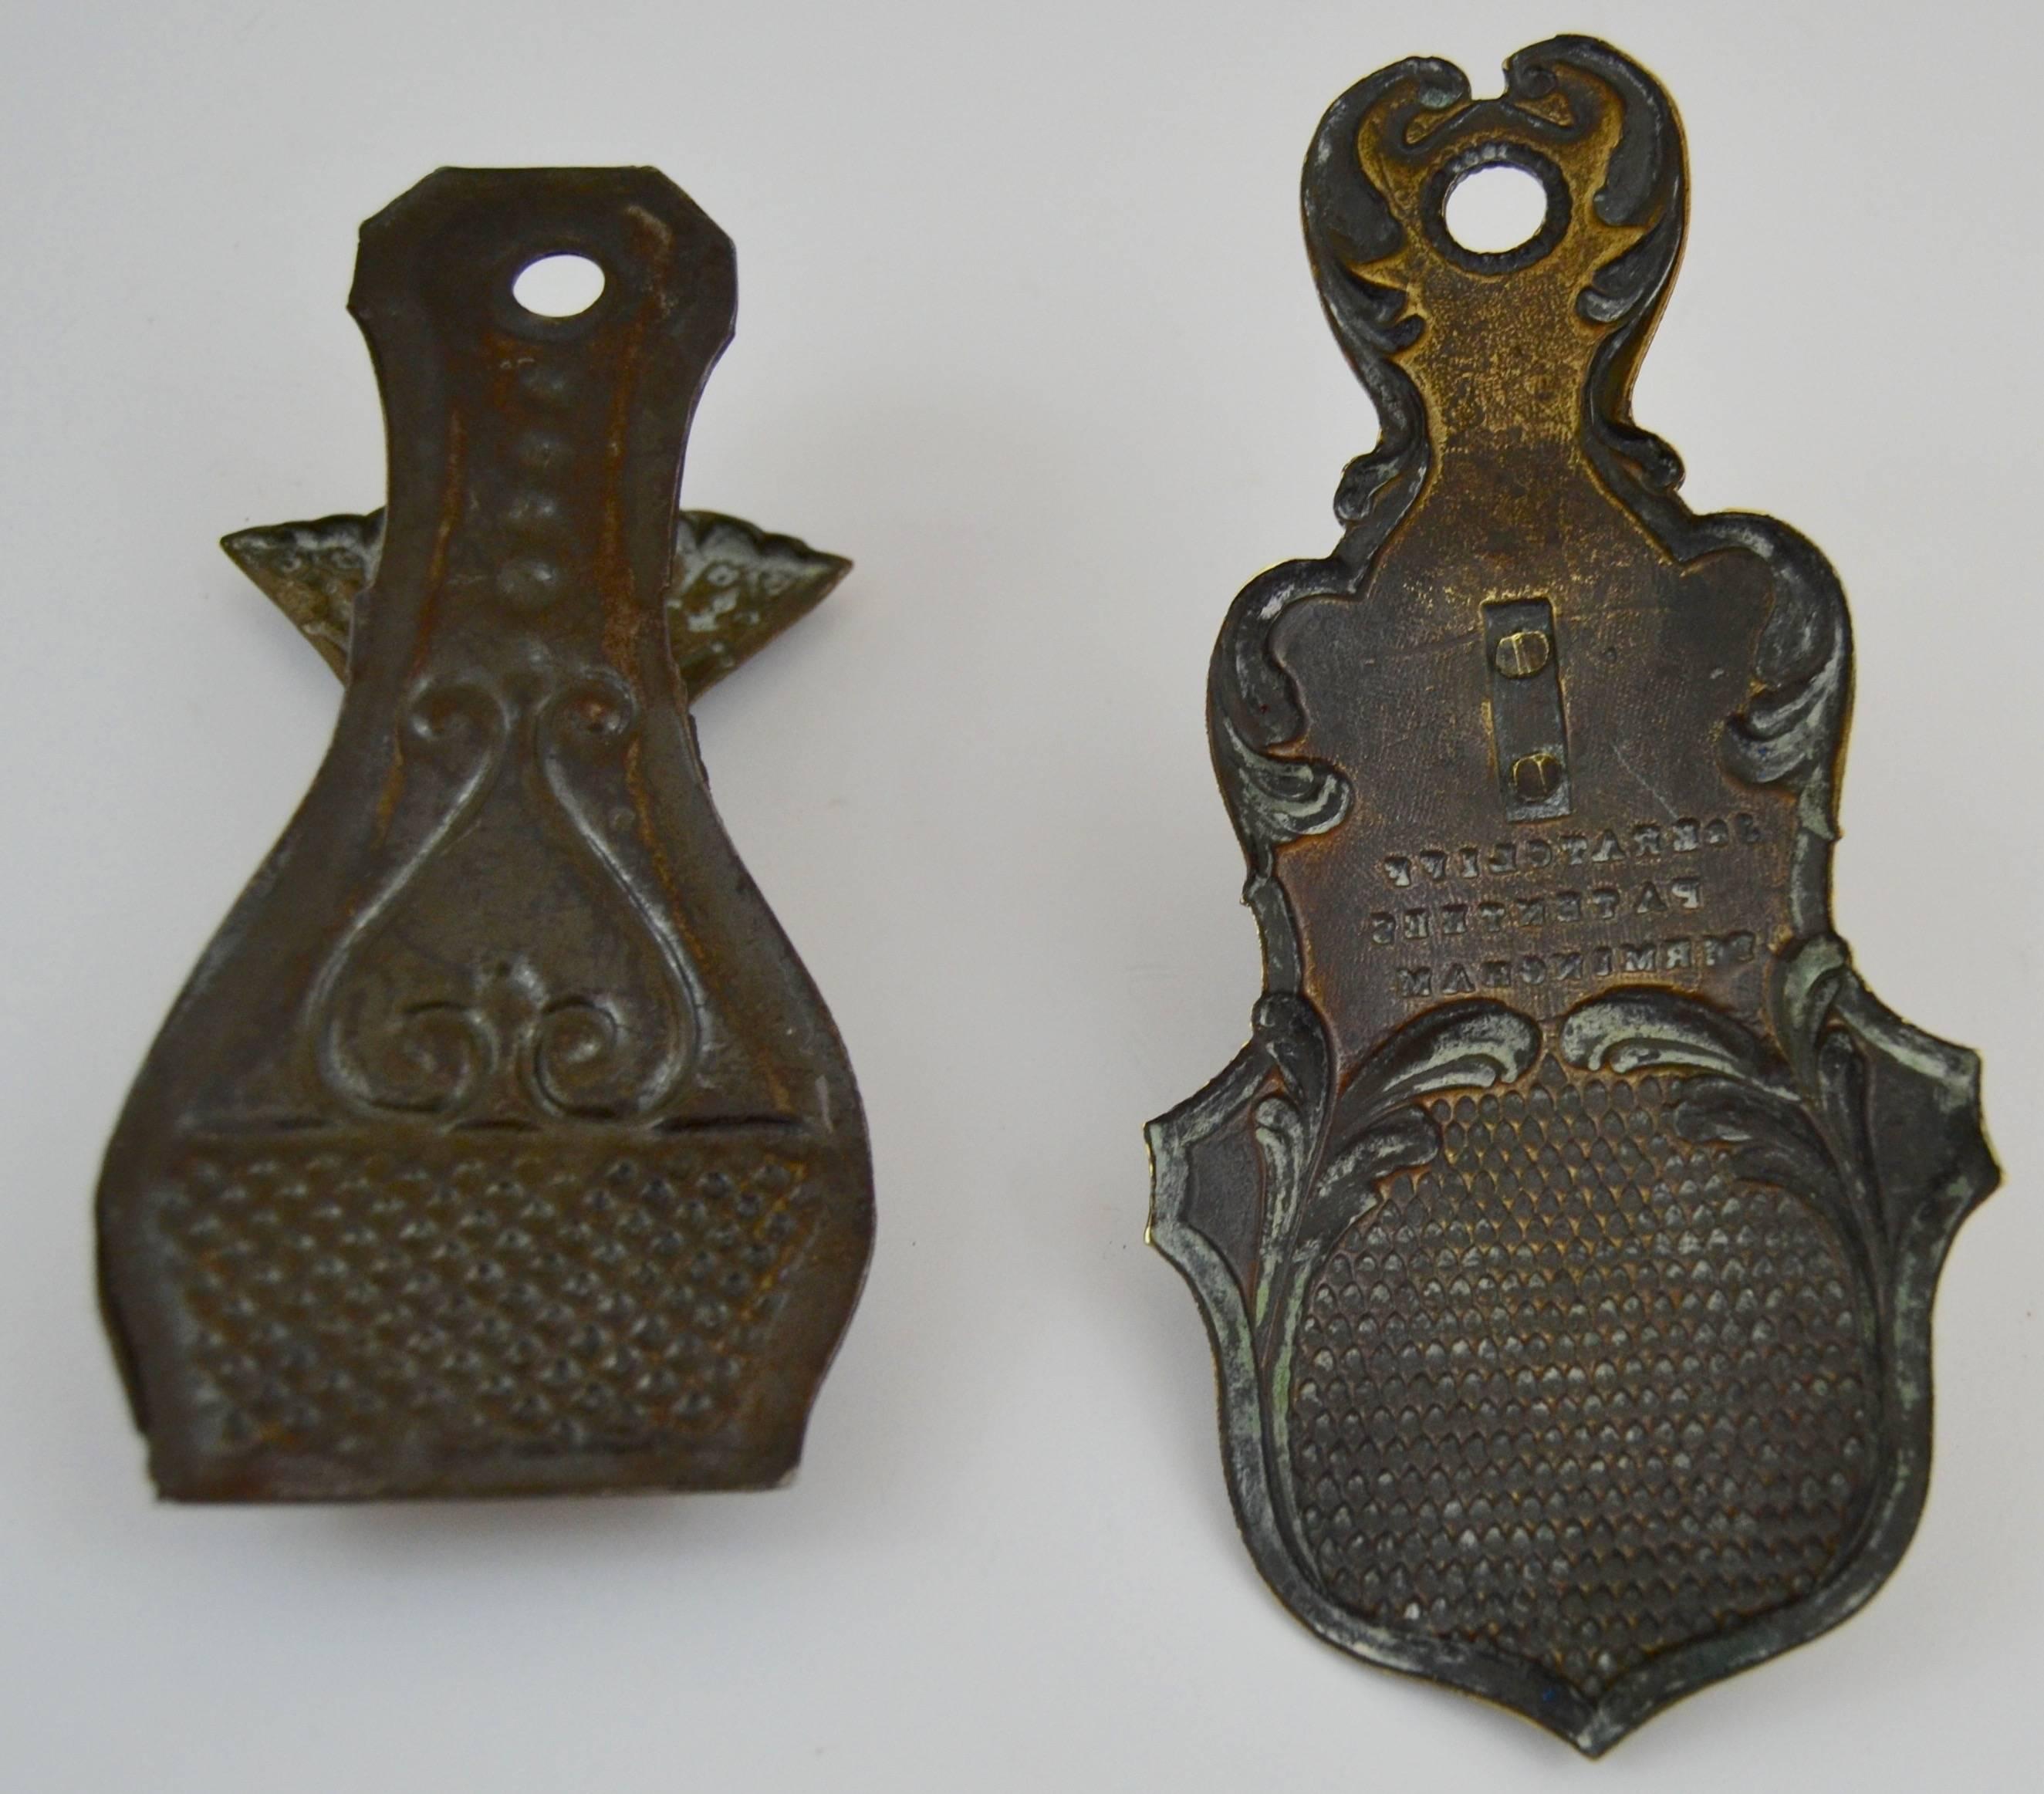 Two Victorian letter clips in the form of hands. Pressed brass, one has a manufactures stamp, J.E. Ratcliff, Birmingham. Spring mechanisms.